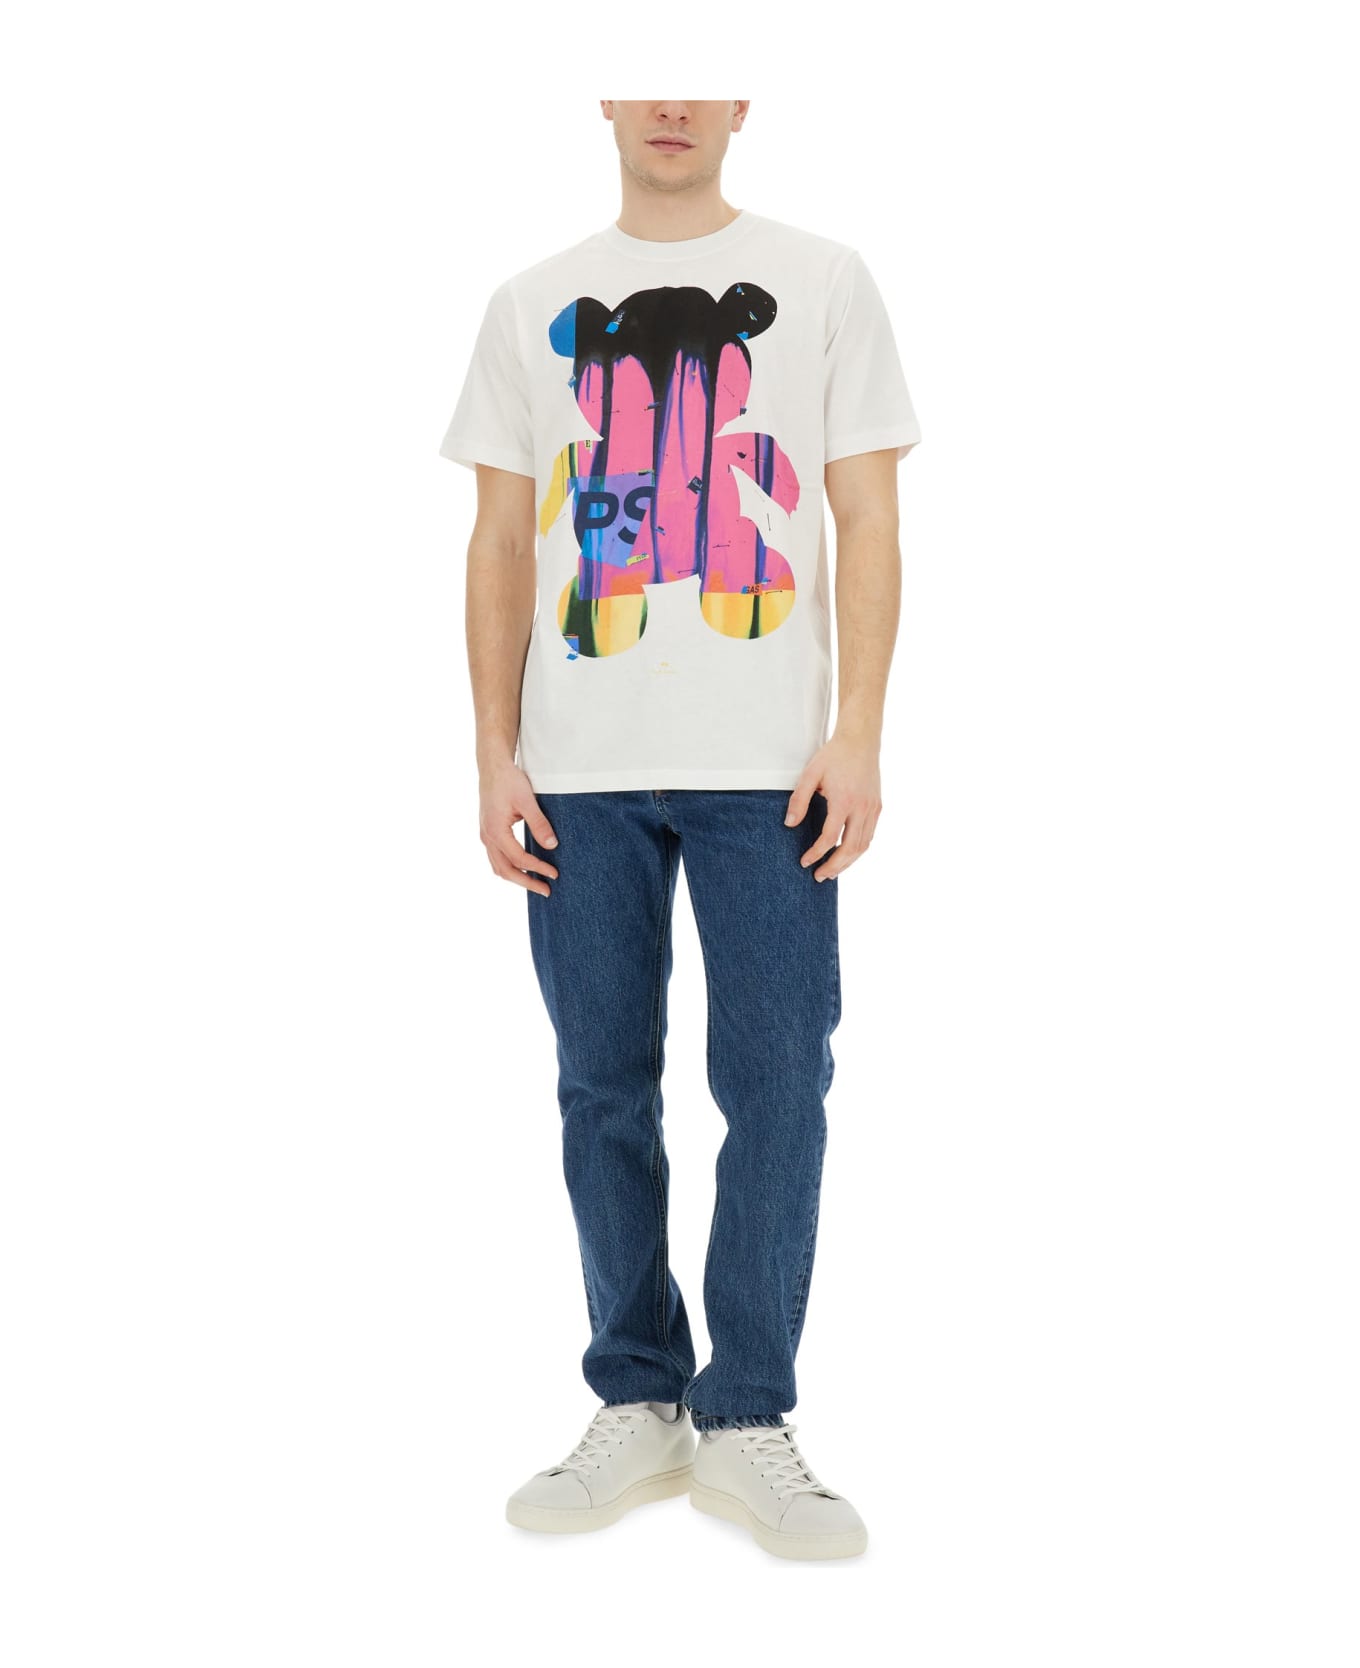 PS by Paul Smith Teddy T-shirt - WHITE シャツ